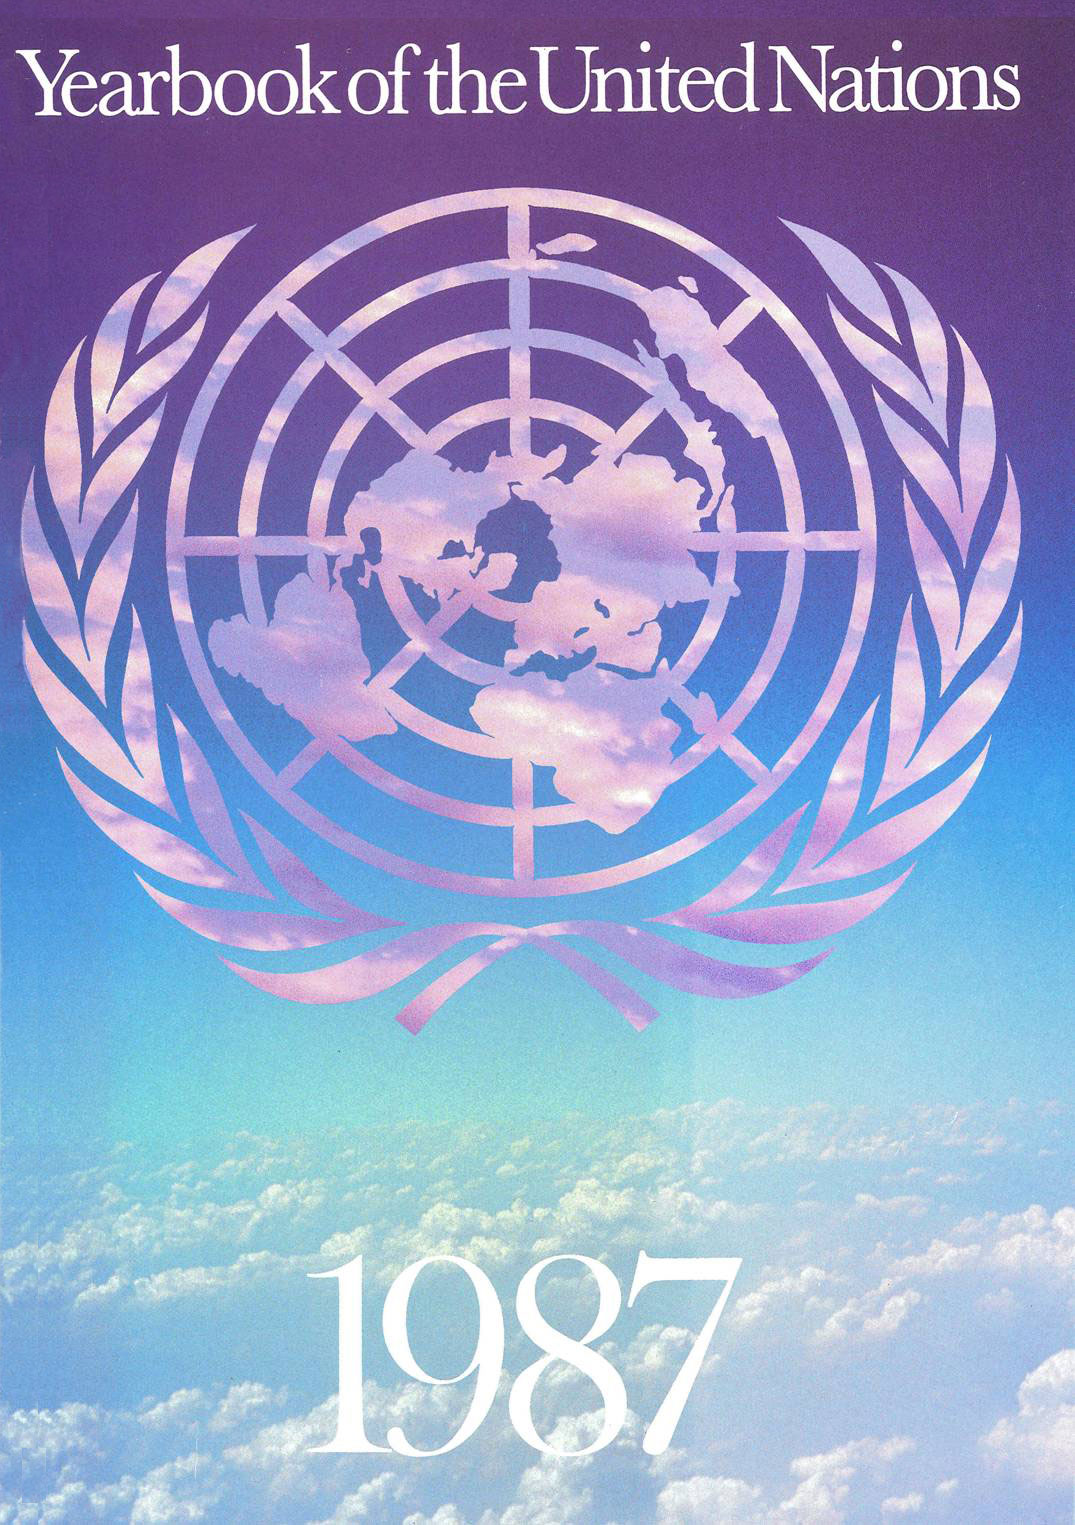 image of Yearbook of the United Nations 1987